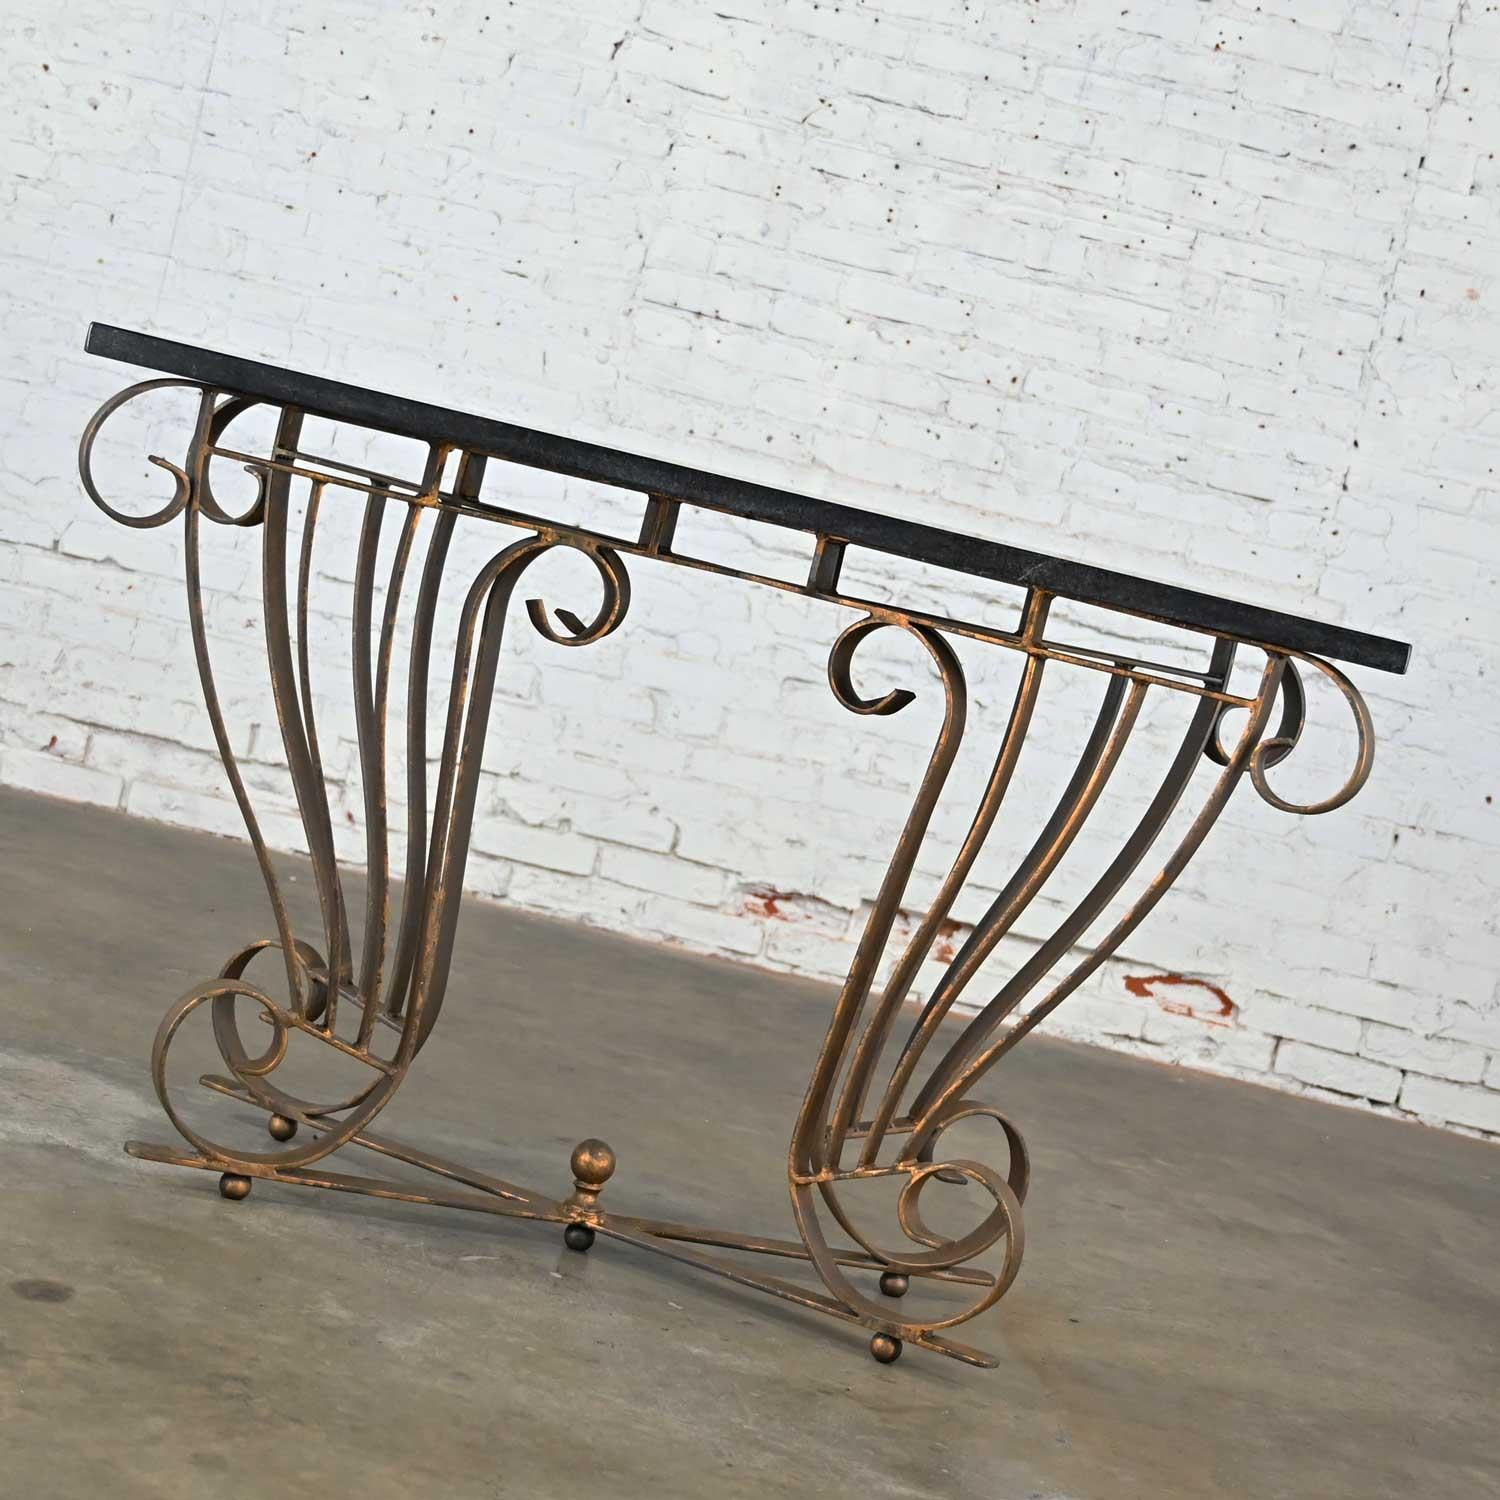 Gorgeous vintage Art Deco style wrought iron console table with painted faux gold leaf finished base and a solid granite top. Beautiful condition, keeping in mind that this is vintage and not new so will have signs of use and wear. There are no